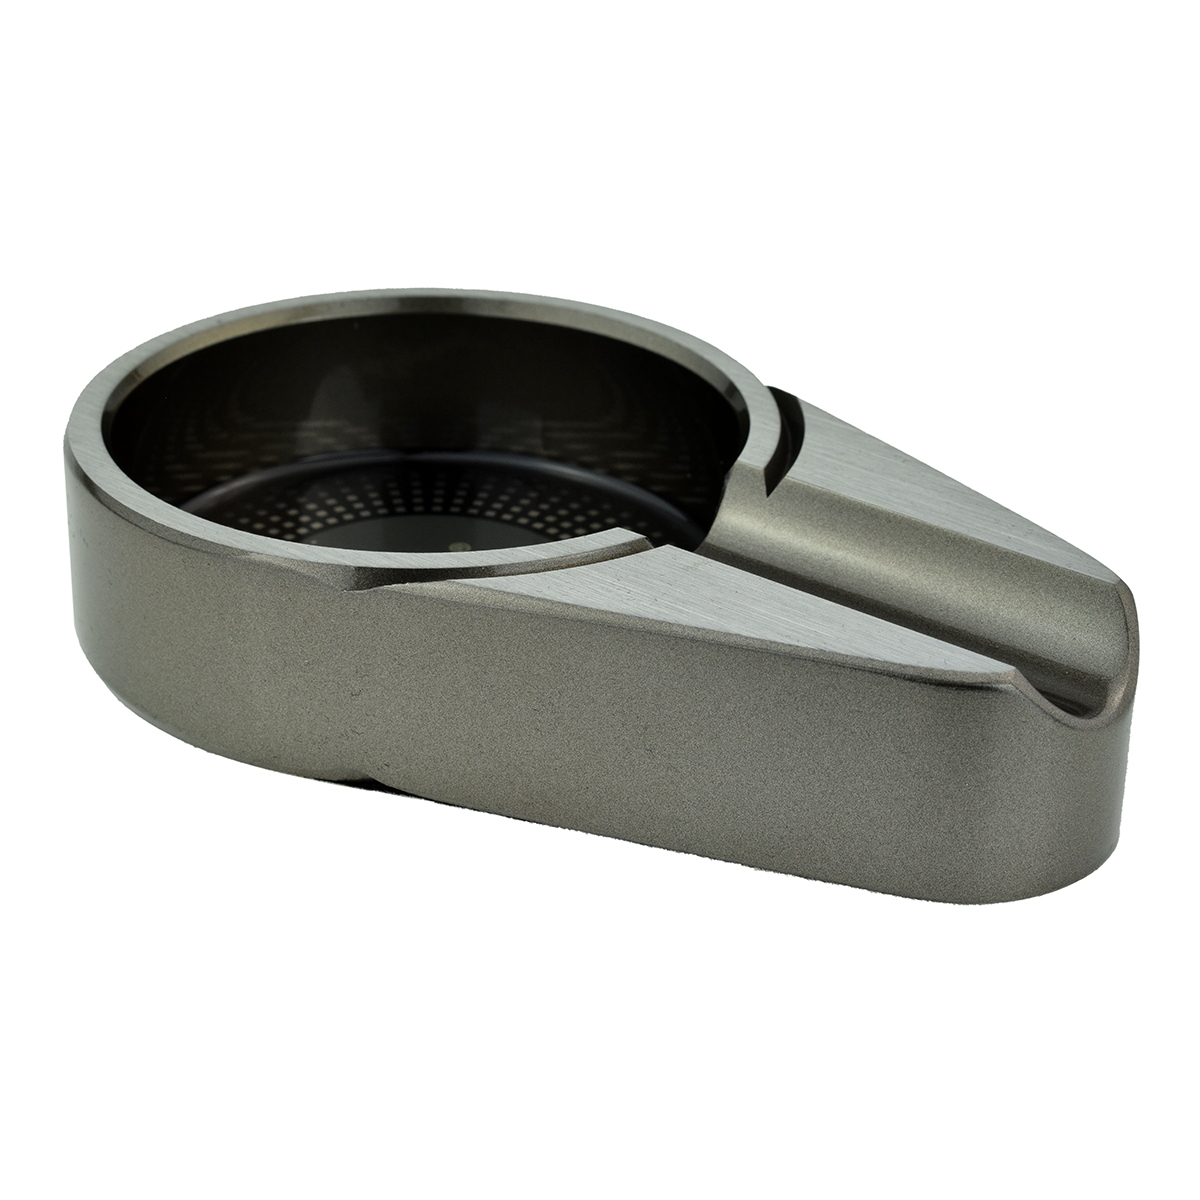 Angelo Stainless Steel One Position Cigar Ashtray 1